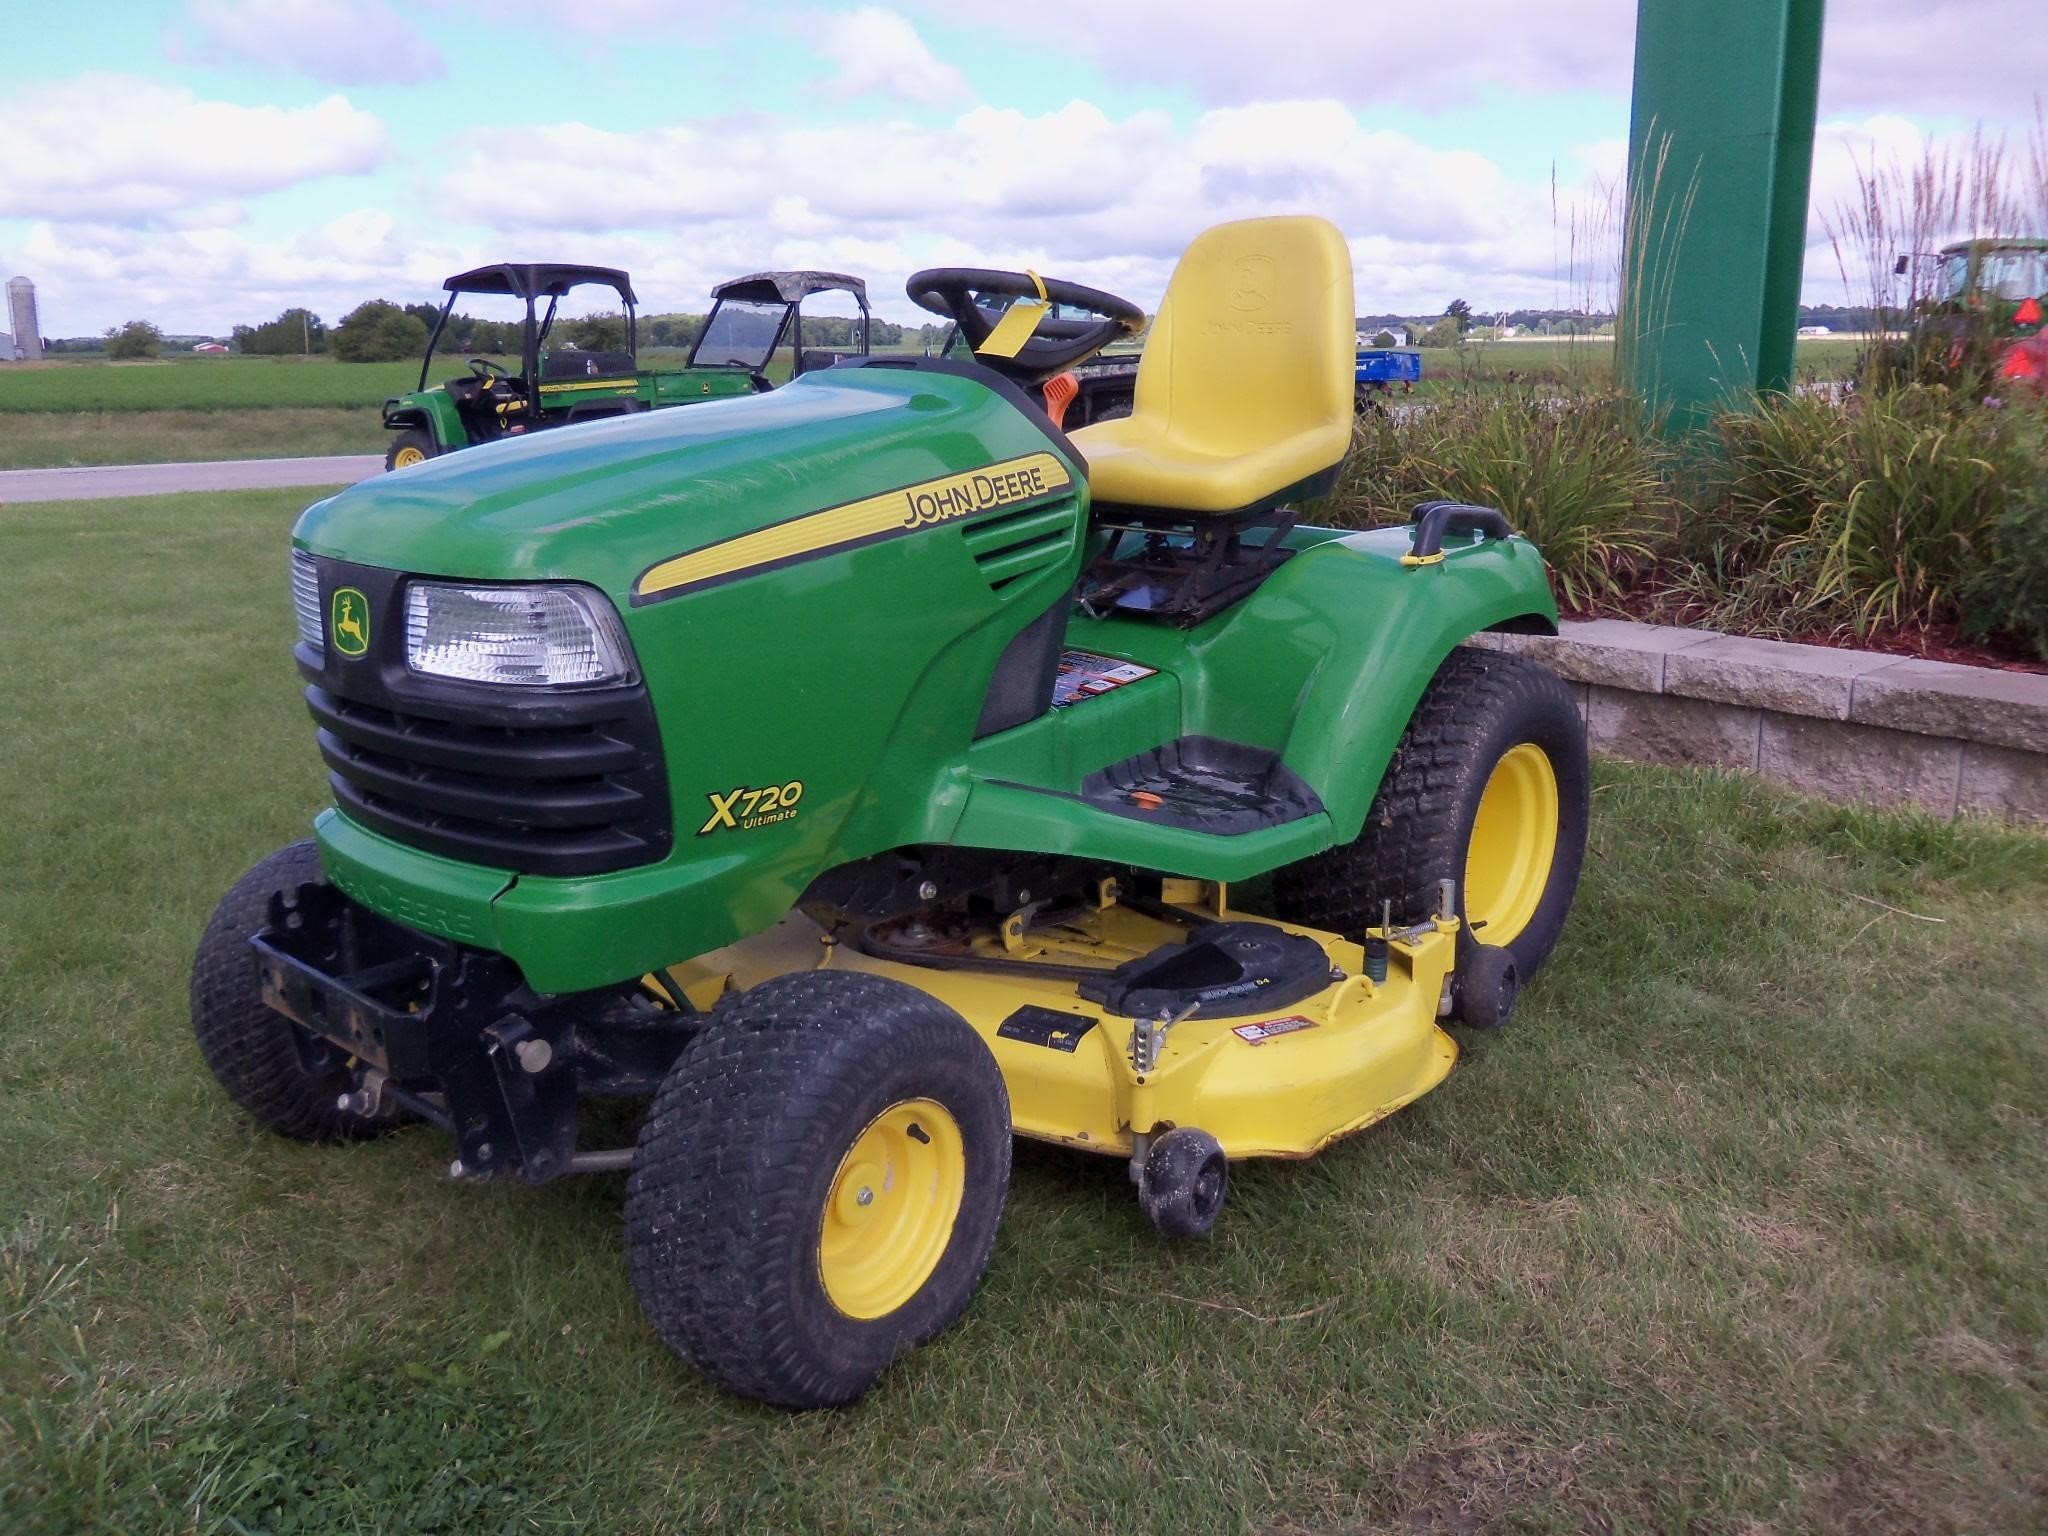 Wisconsin Ag Connection - JOHN DEERE X720 Riding Lawn Mowers for sale